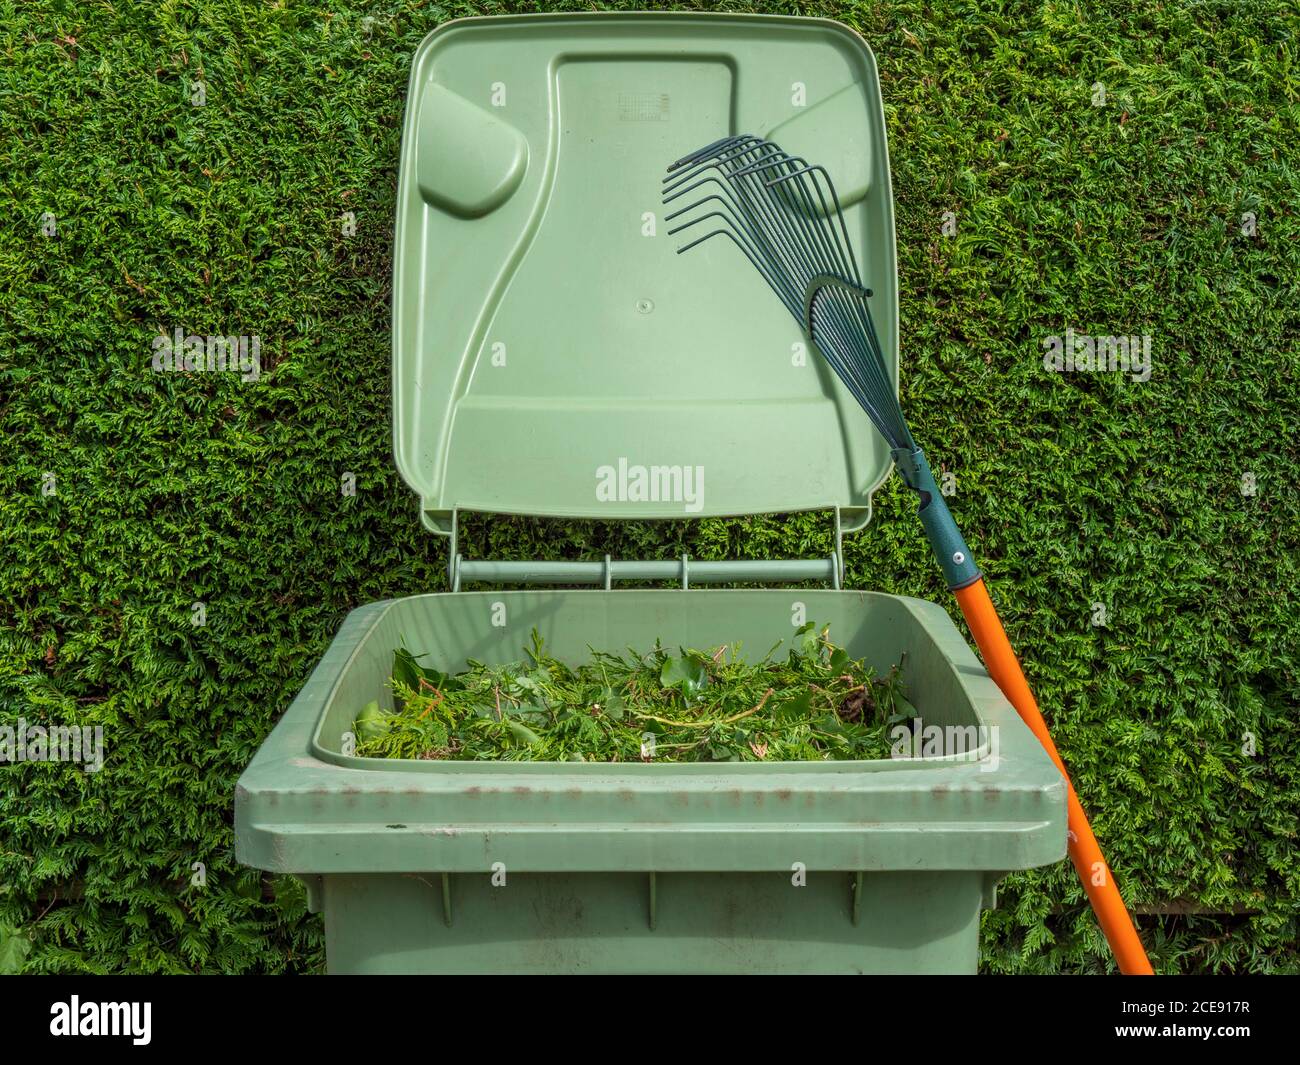 An open green bin, full of clippings from the conifer fir hedge behind, with a lawn rake leaning against the wheely bin. Stock Photo